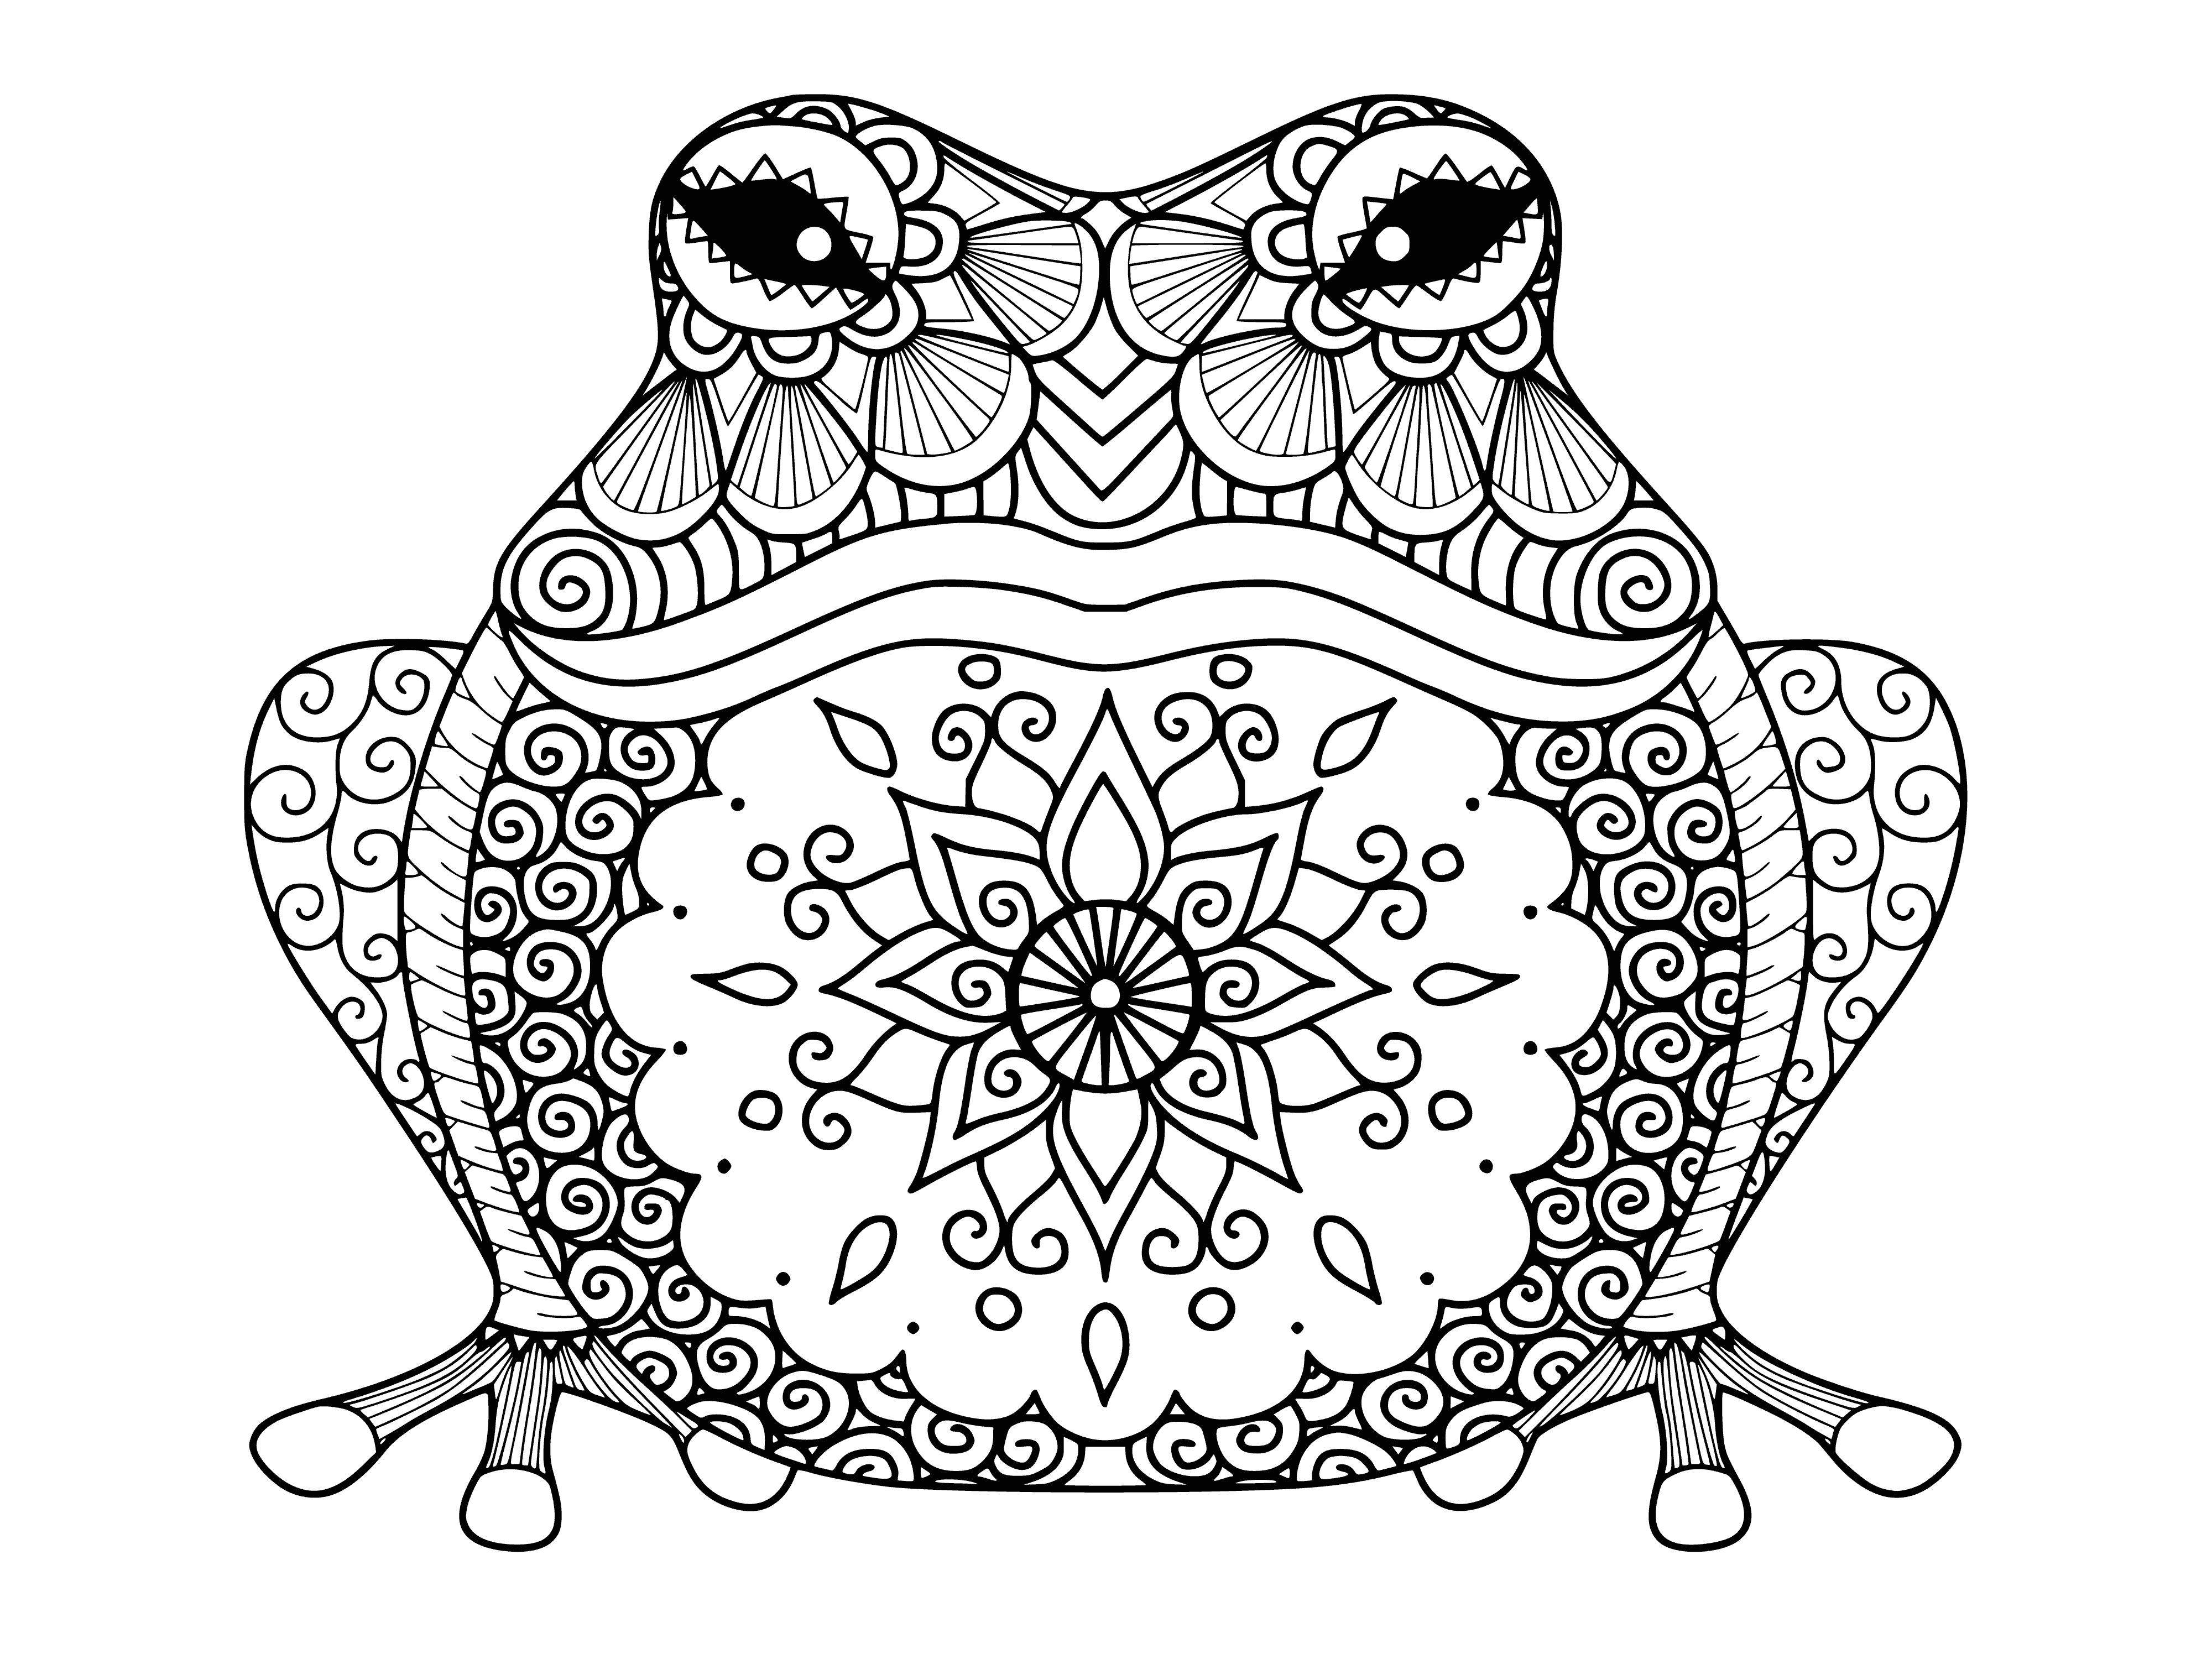 coloring page: Frog on lily pad in pond with butterfly, smiling happily.